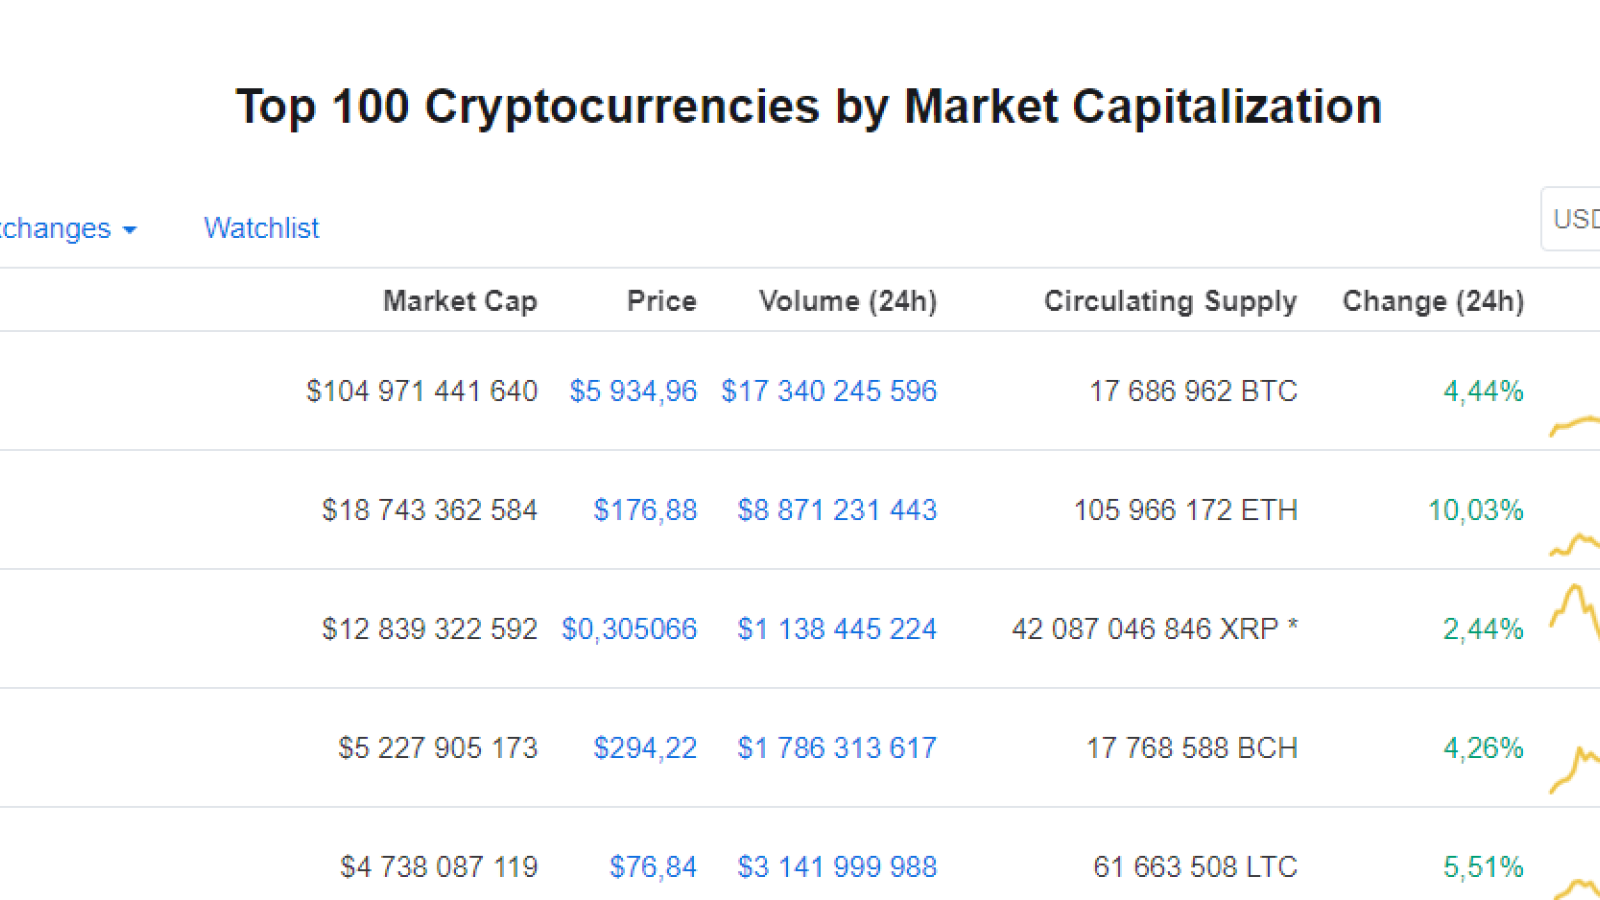 Top 100 Cryptocurrency